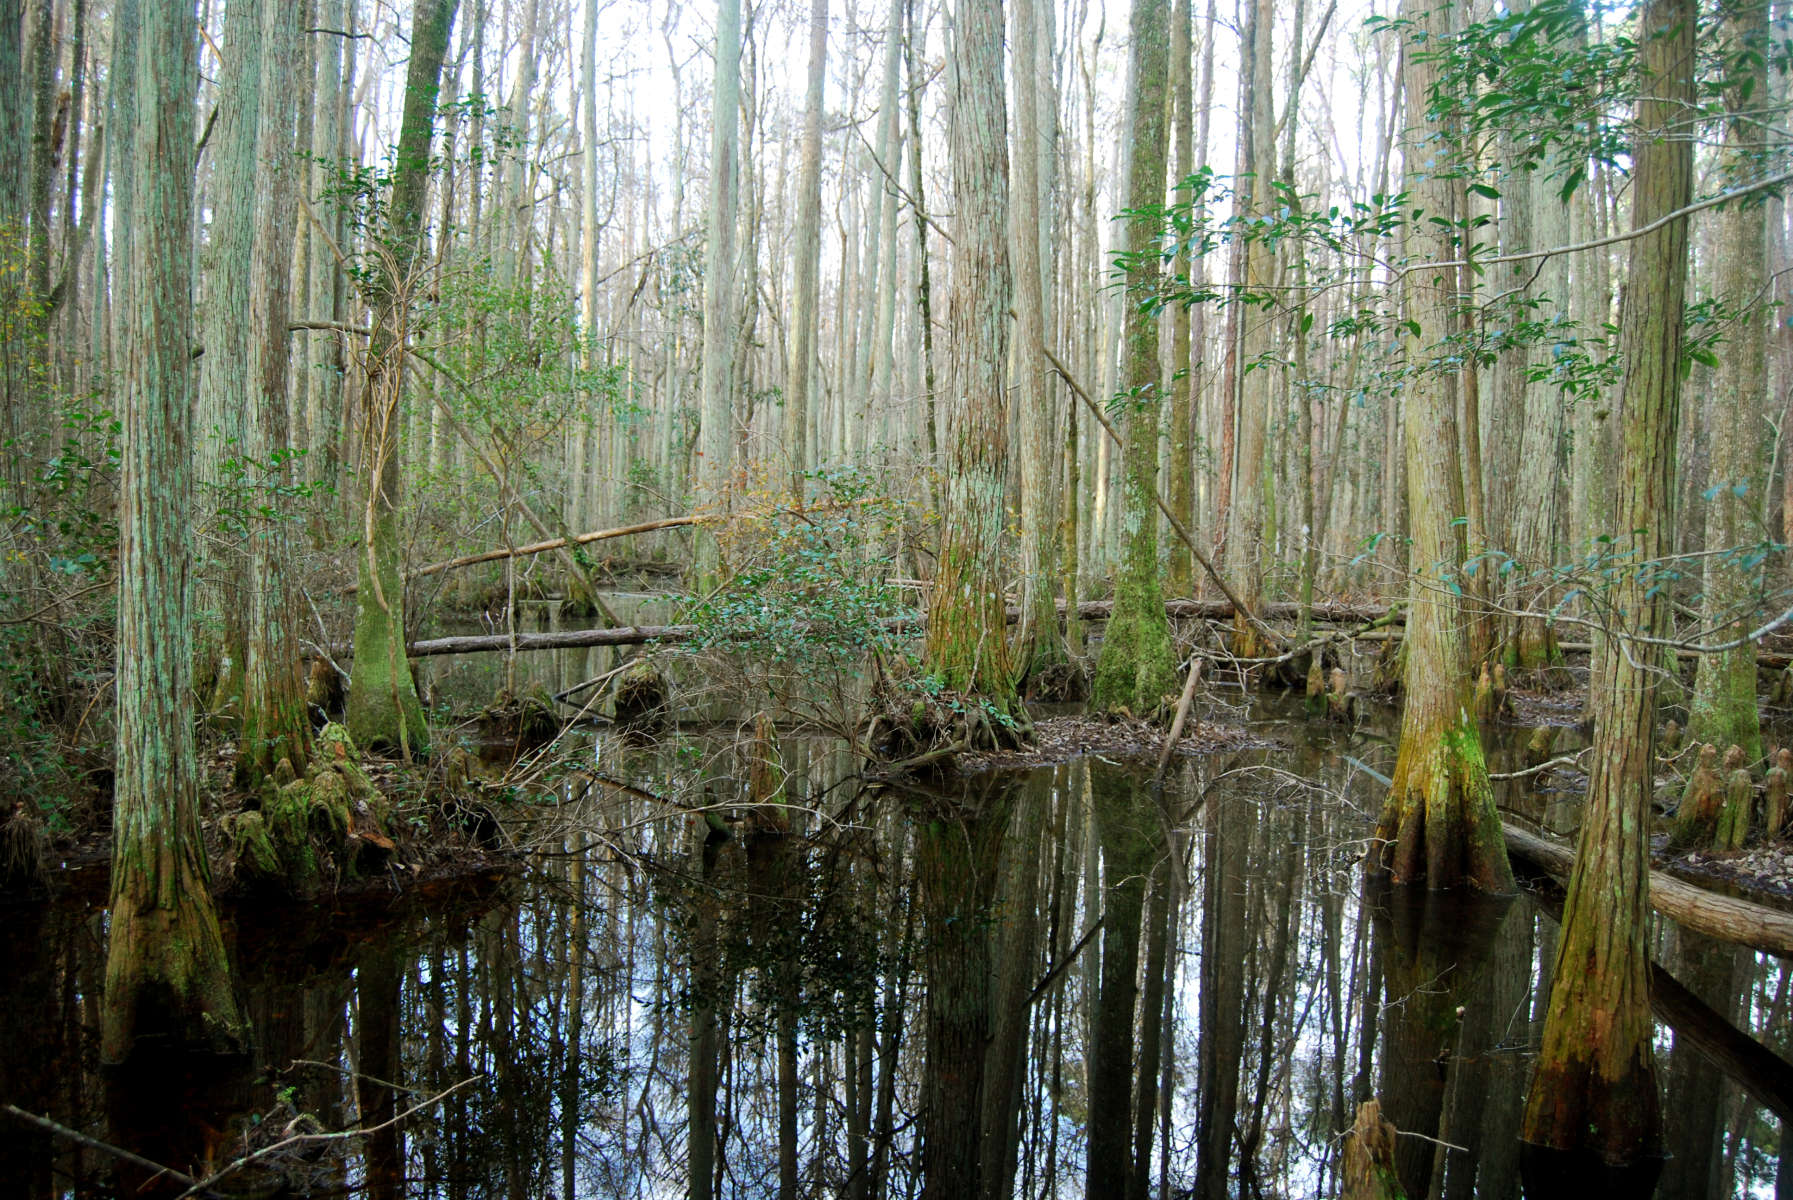 Looking for a place to hunt, camp at on the First Coast? Check out Ocean  Pond at Osceola State Park! 